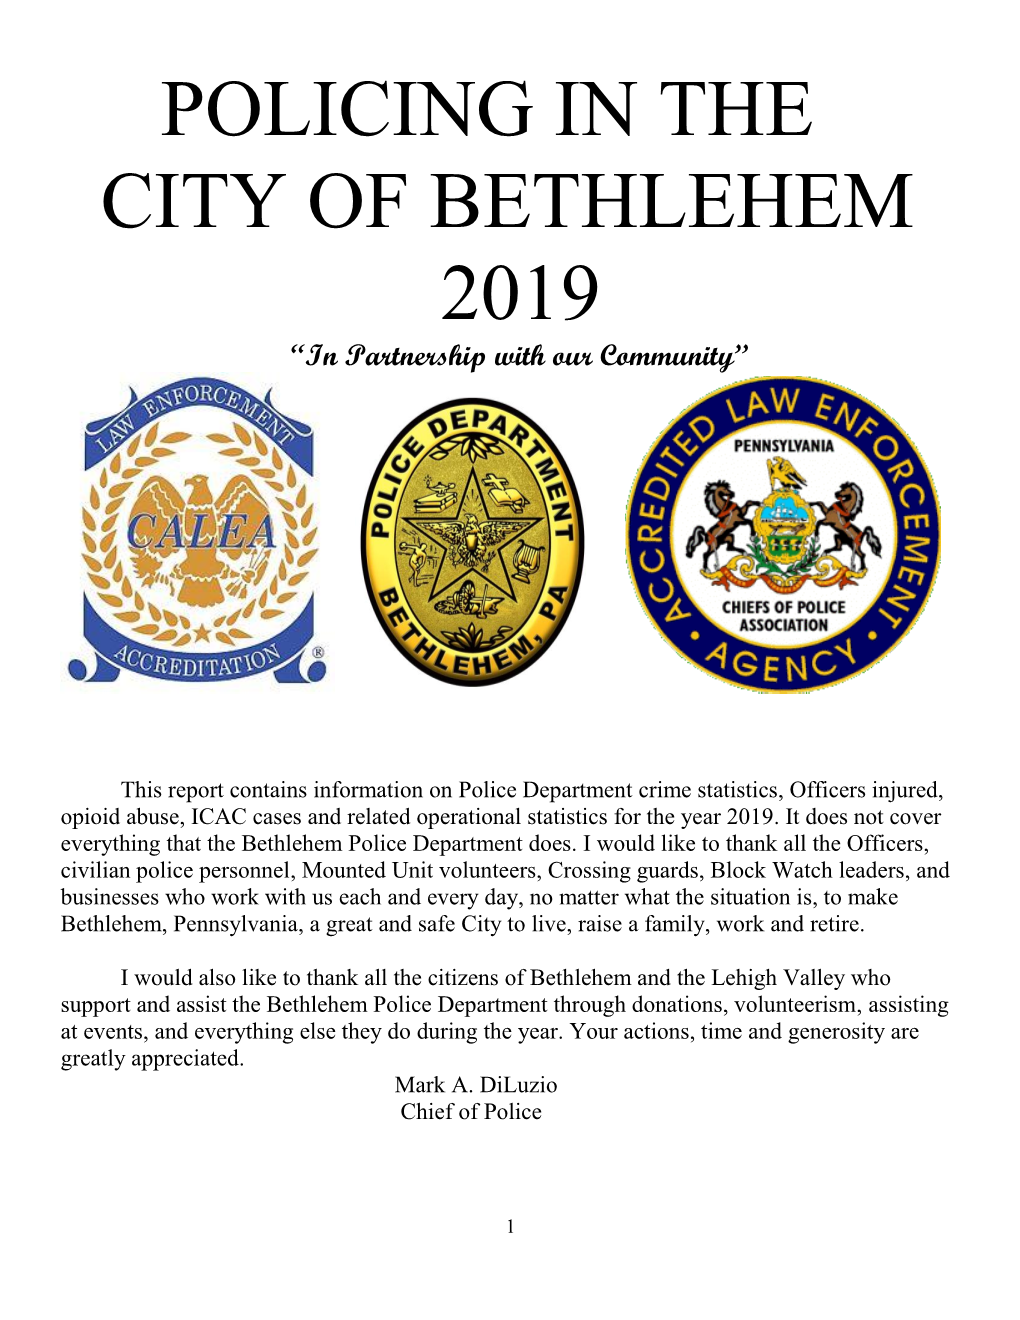 POLICING in the CITY of BETHLEHEM 2019 “In Partnership with Our Community”